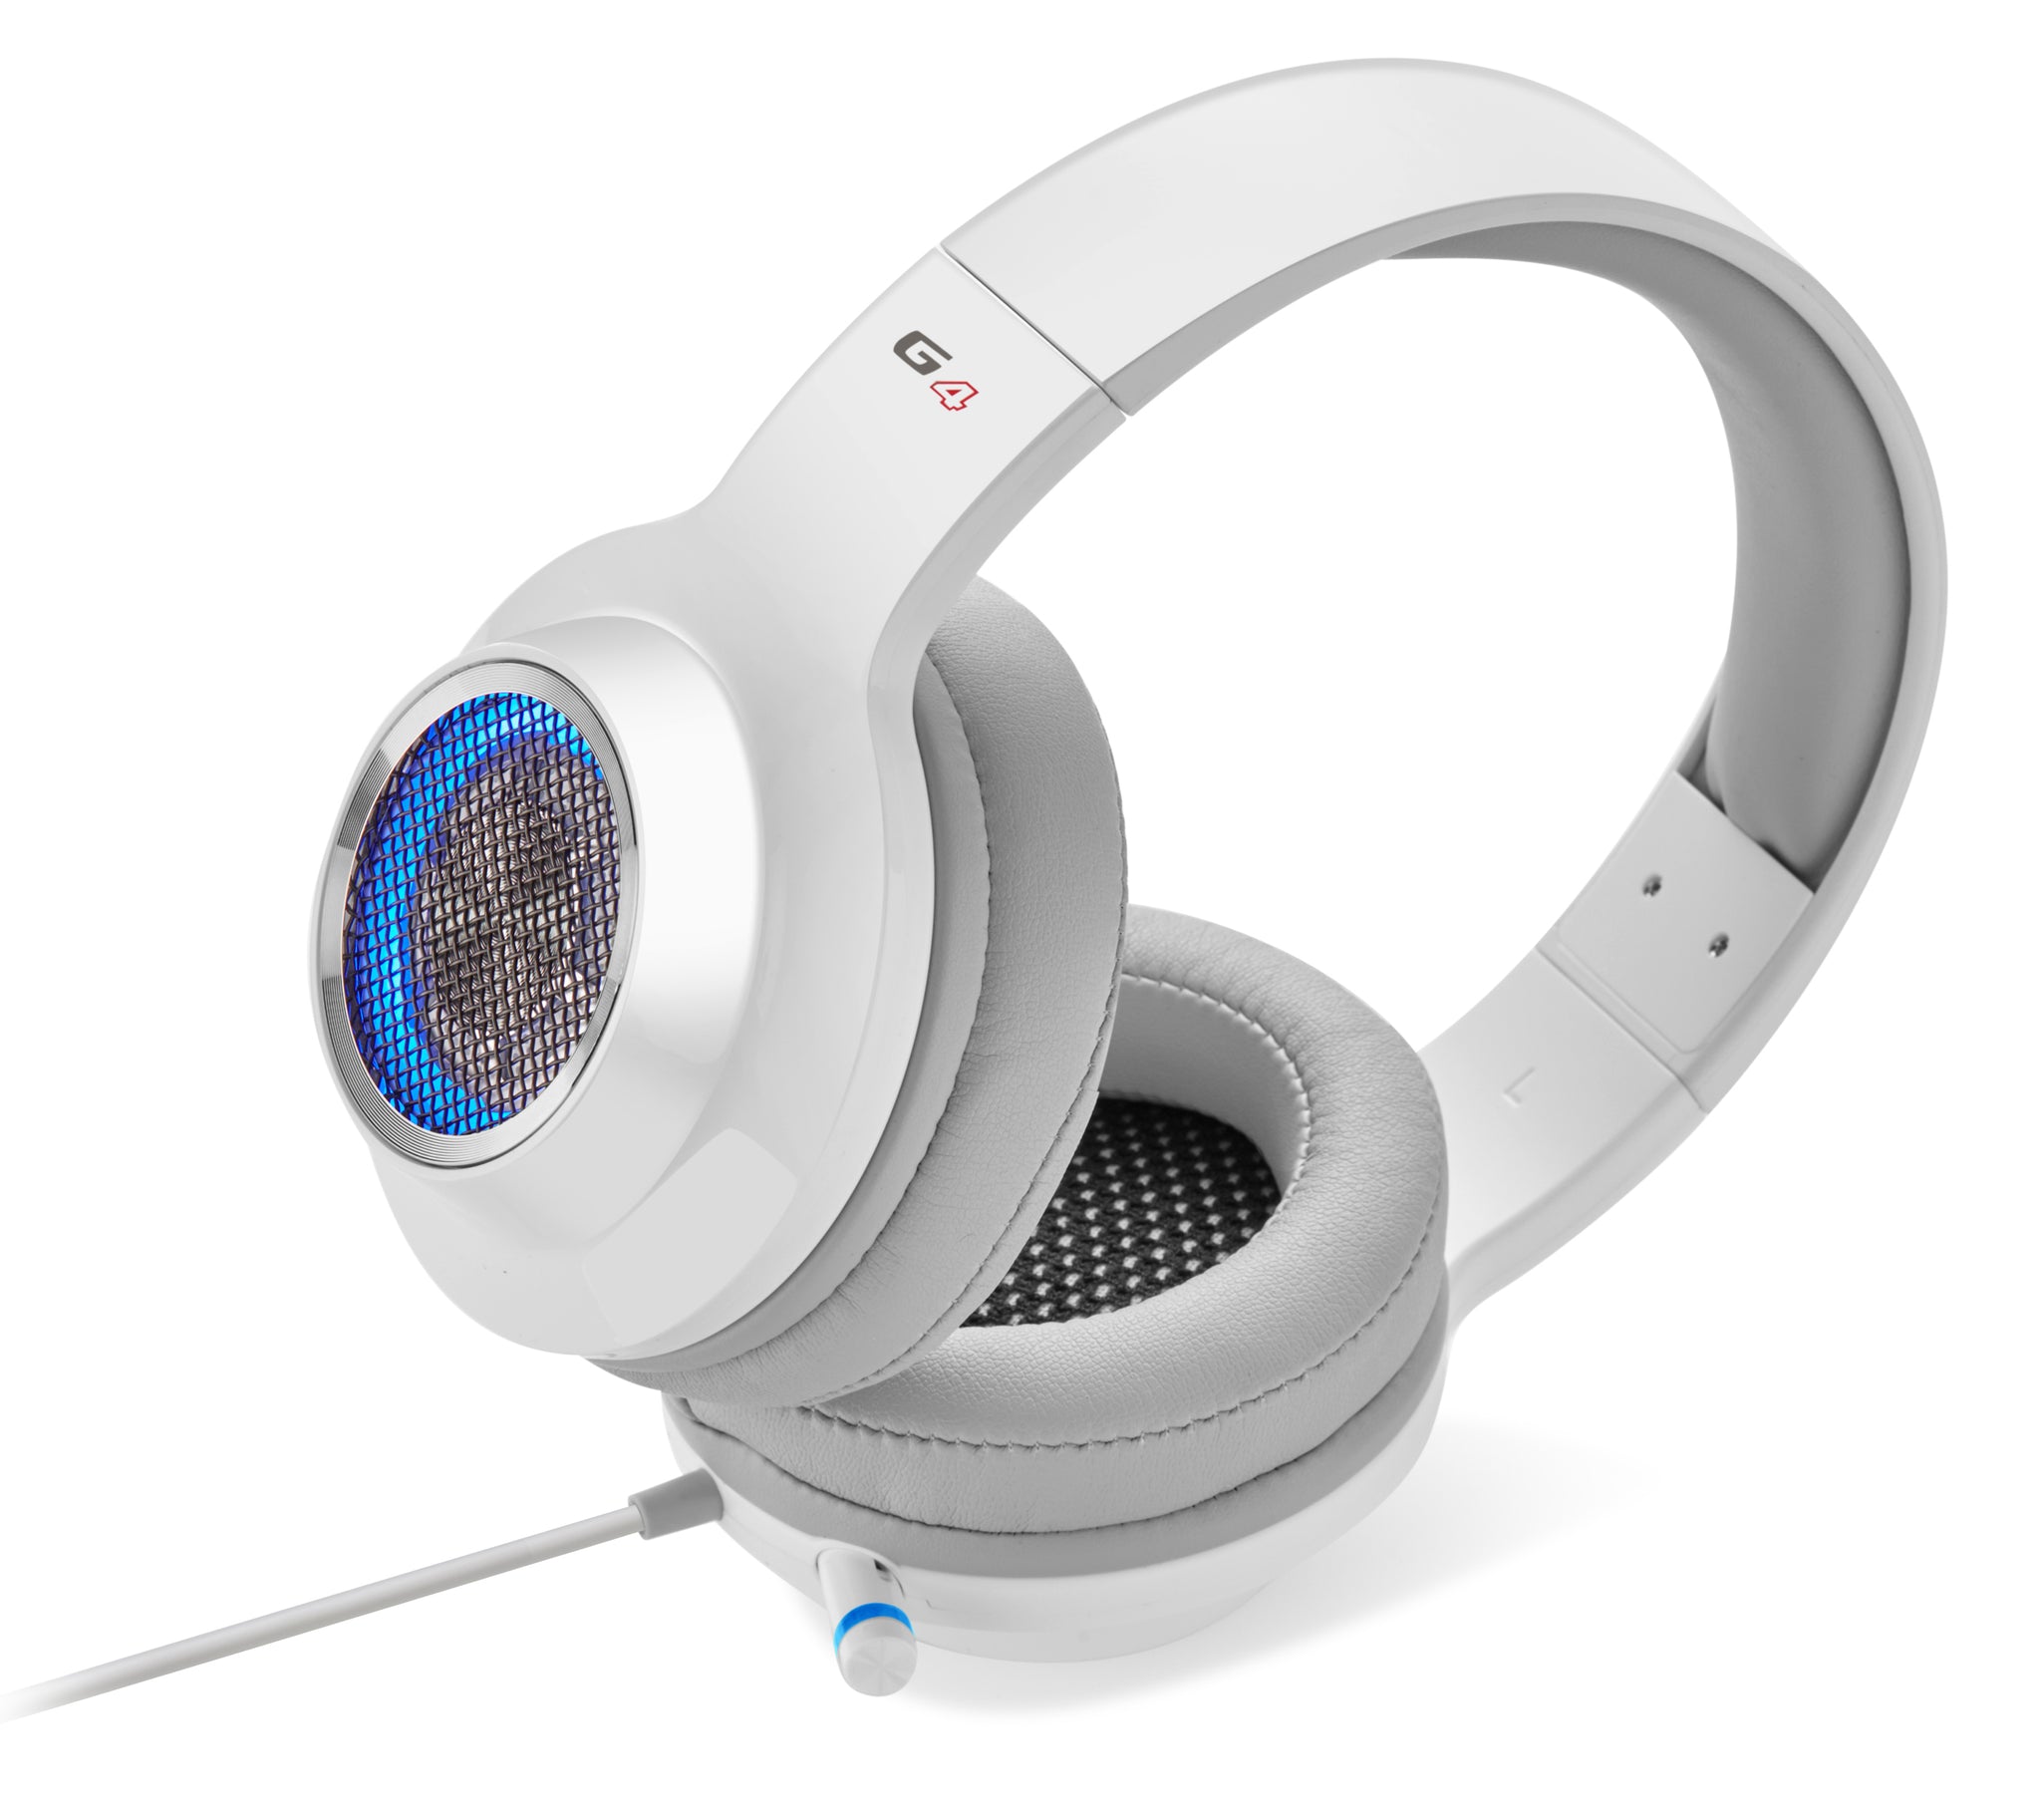 Edifier G4 Professional 7.1 Surround Sound USB Gaming Headset With Microphone - White / Blue